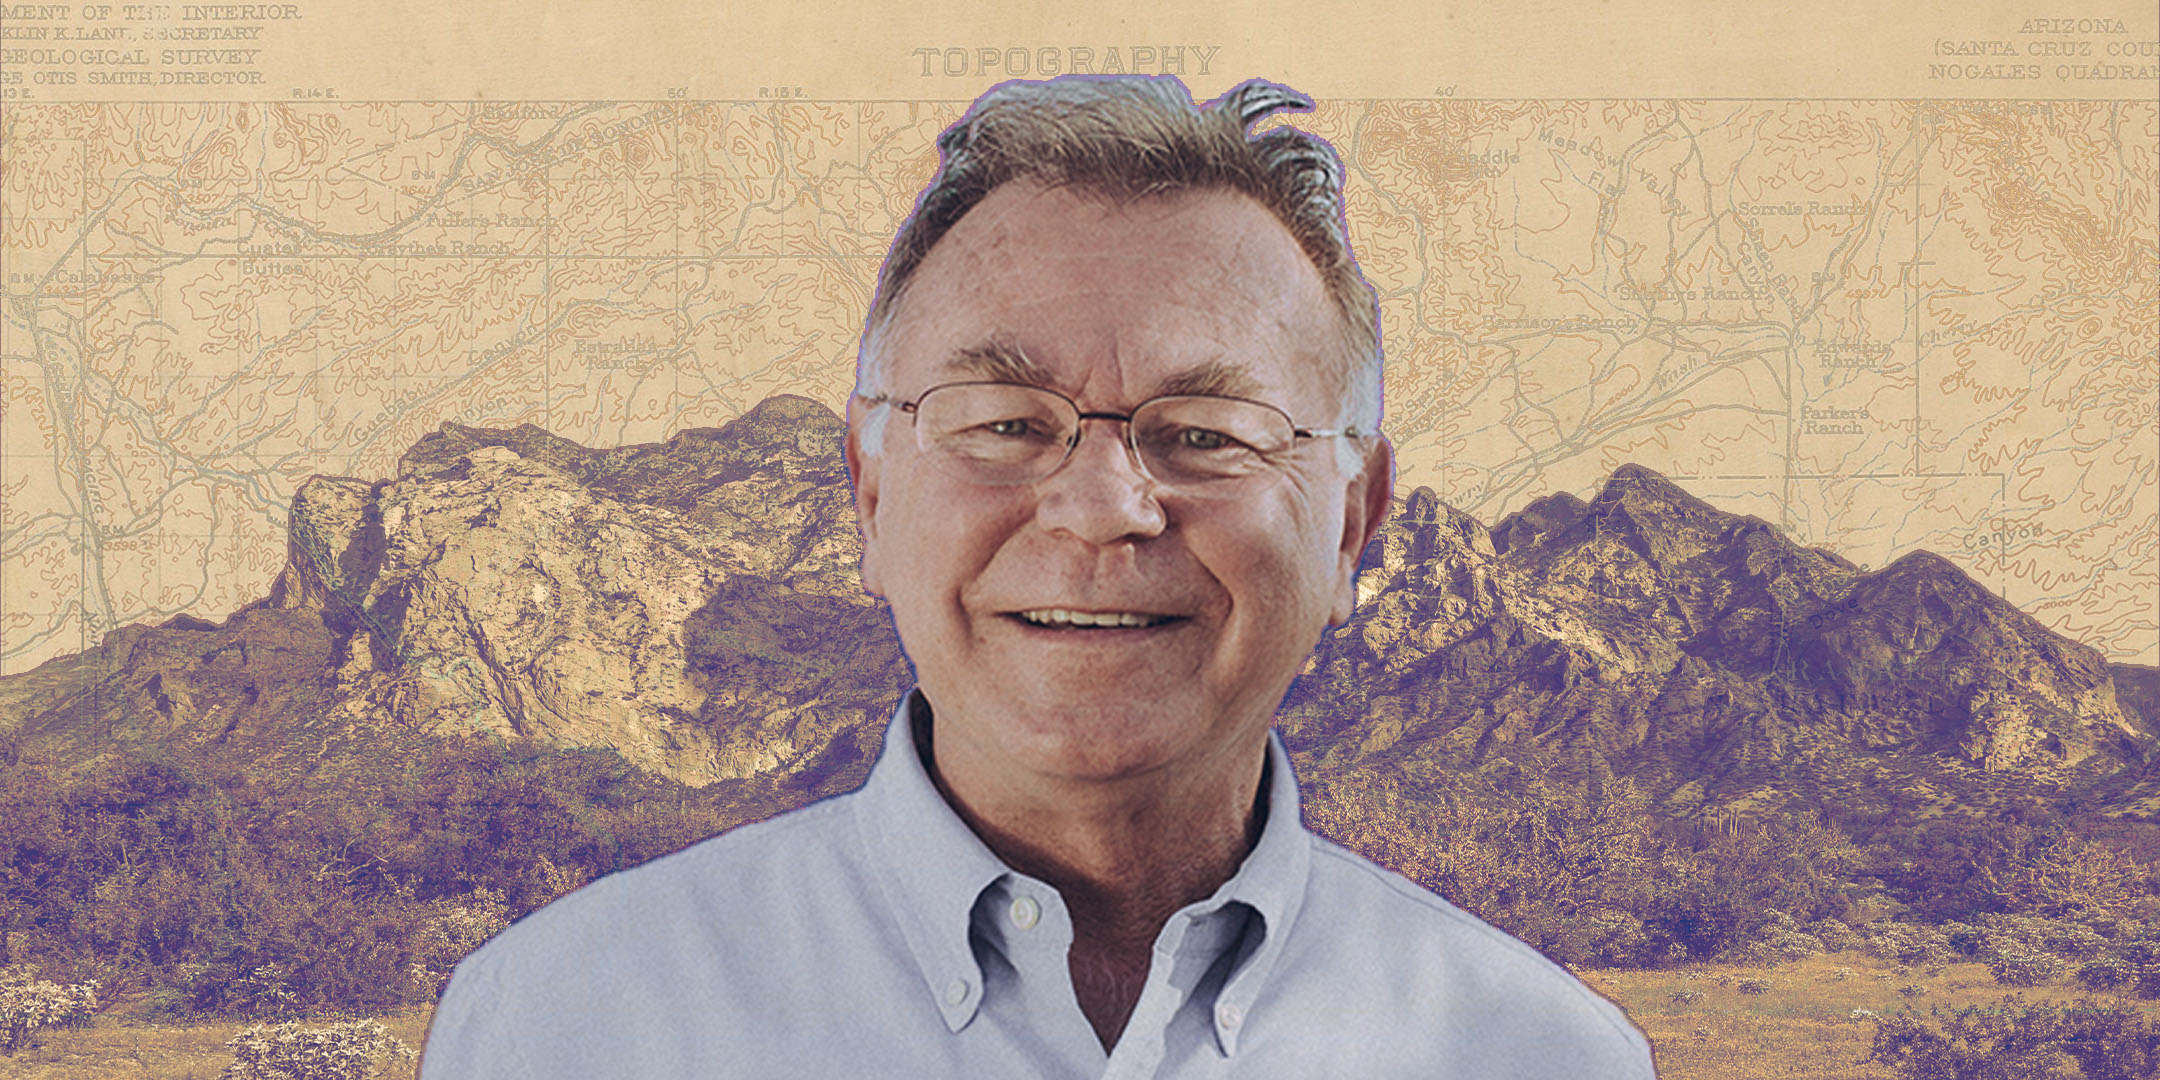 Edited image of Alberto Ríos in front of a mountain range with a map of the Sonoran Desert in the background